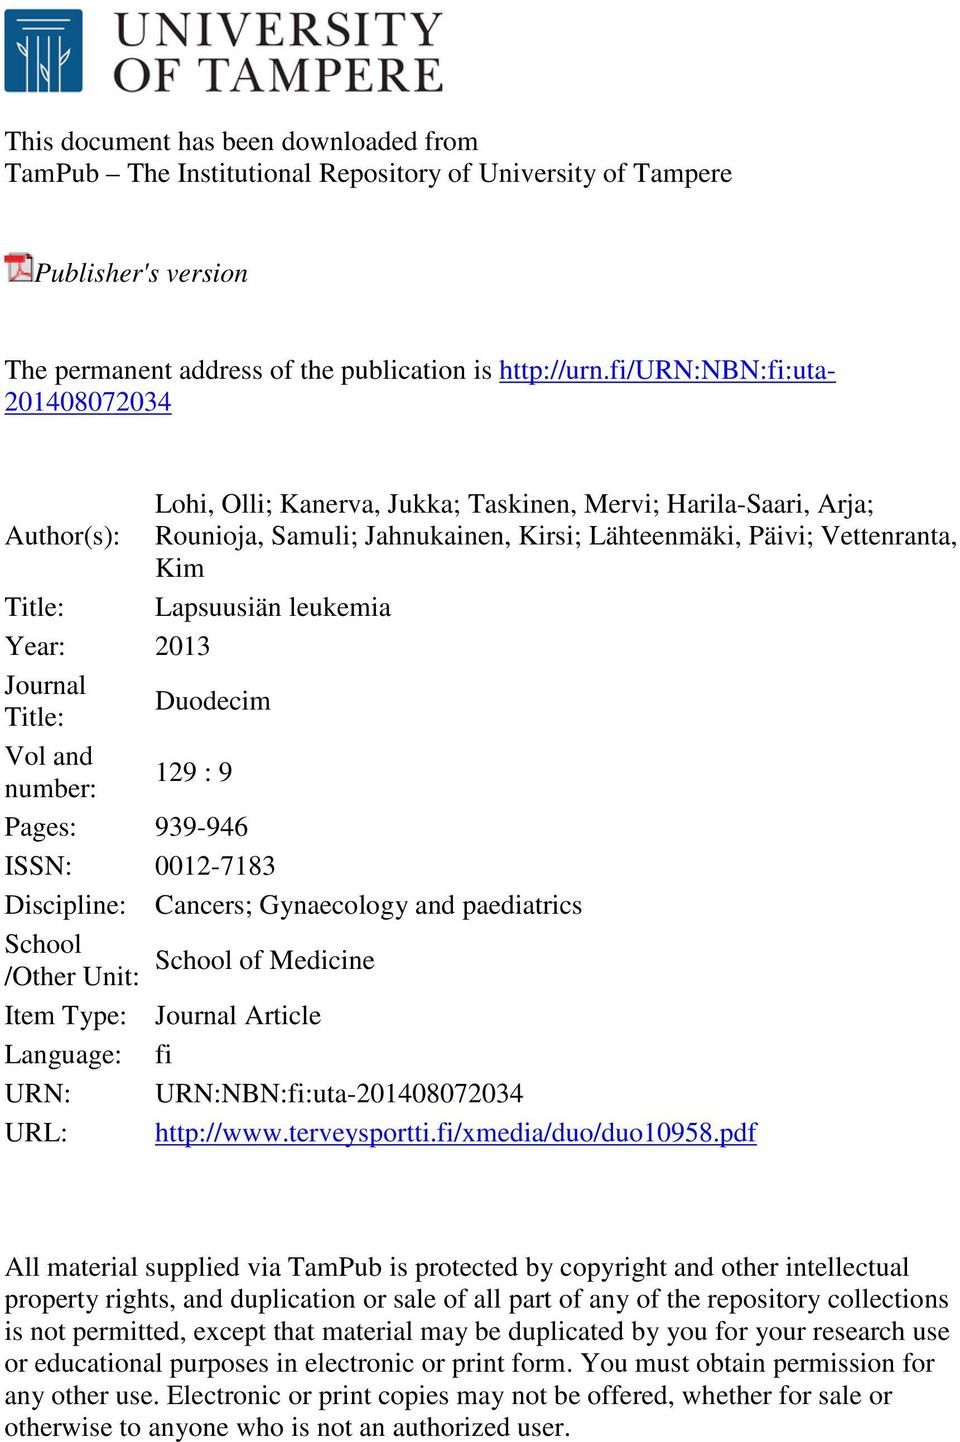 Lapsuusiän leukemia Year: 2013 Journal Title: Duodecim Vol and number: 129 : 9 Pages: 939-946 ISSN: 0012-7183 Discipline: Cancers; Gynaecology and paediatrics School School of Medicine /Other Unit: